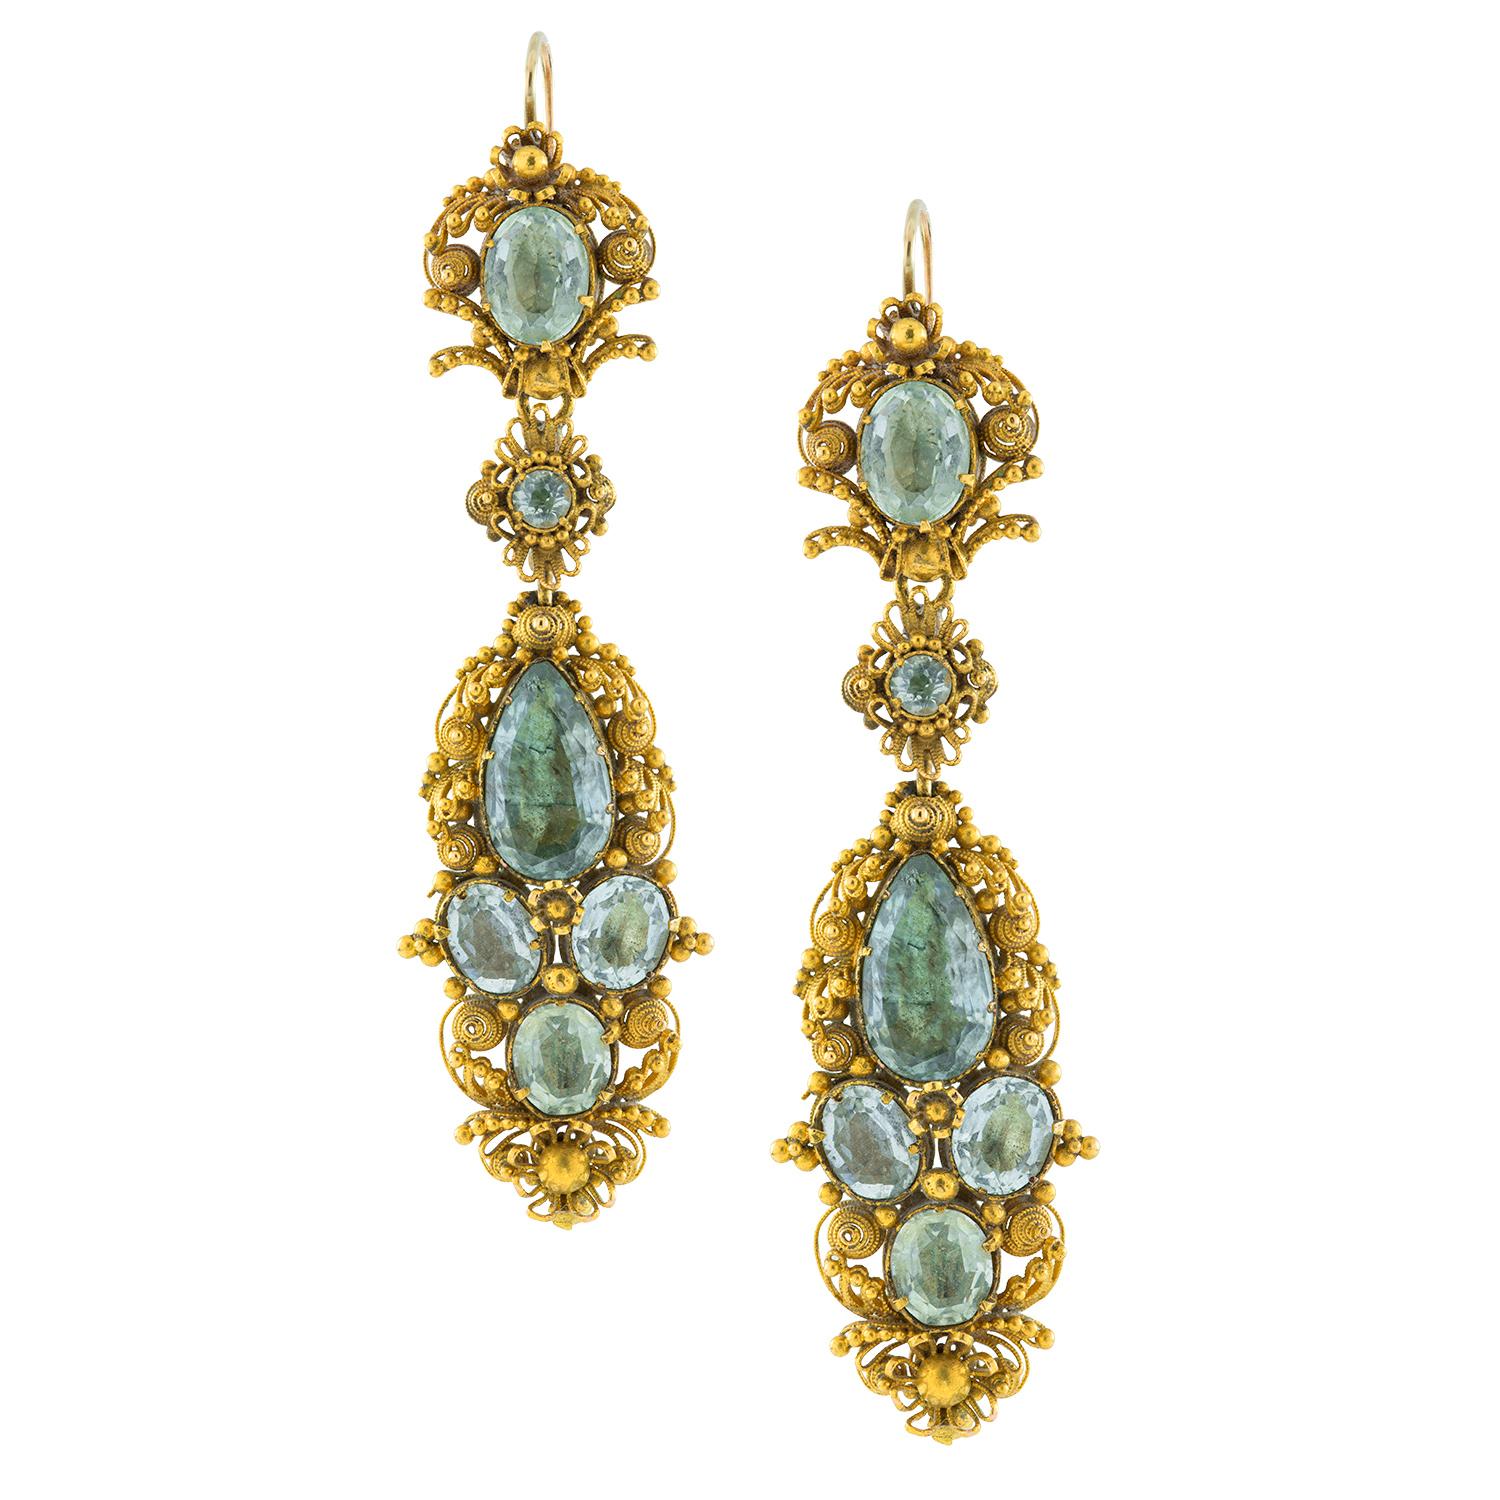 A Georgian aquamarine and gold cannetille suite, the necklace consisting of three emerald-cut aquamarine-set gold links, connected with two oval-cut aquamarine-set clusters, attached to a fine gold mesh chain by three floral links on each side, set